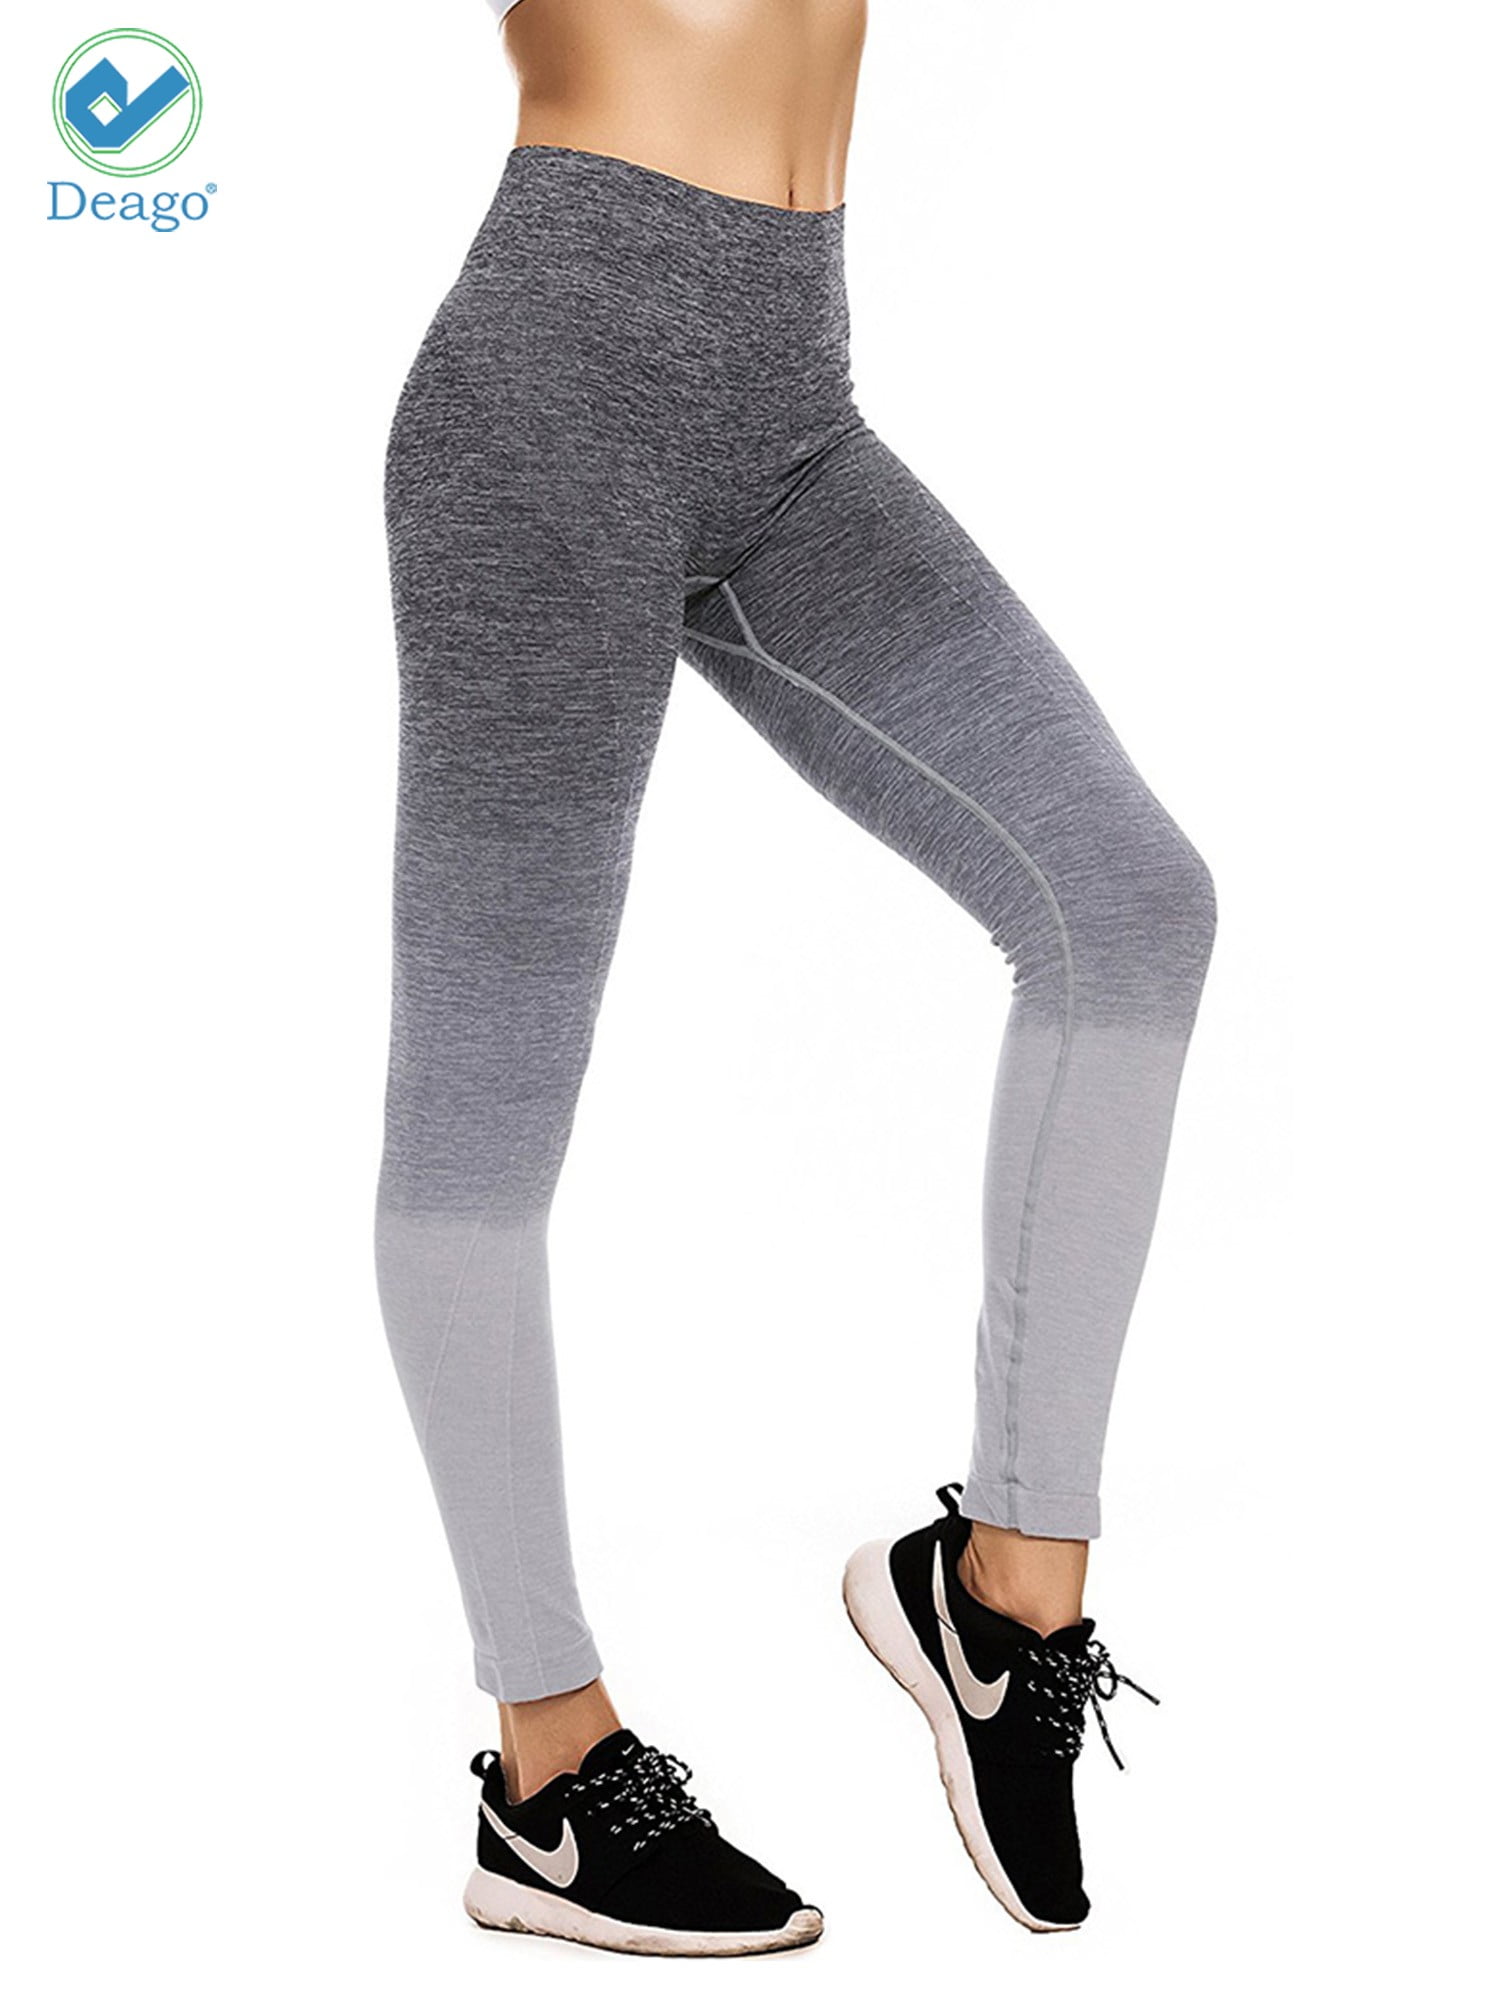 US Womens Yoga Compression Leggings Ombre Fitness Sports Jogging Pants Trousers 